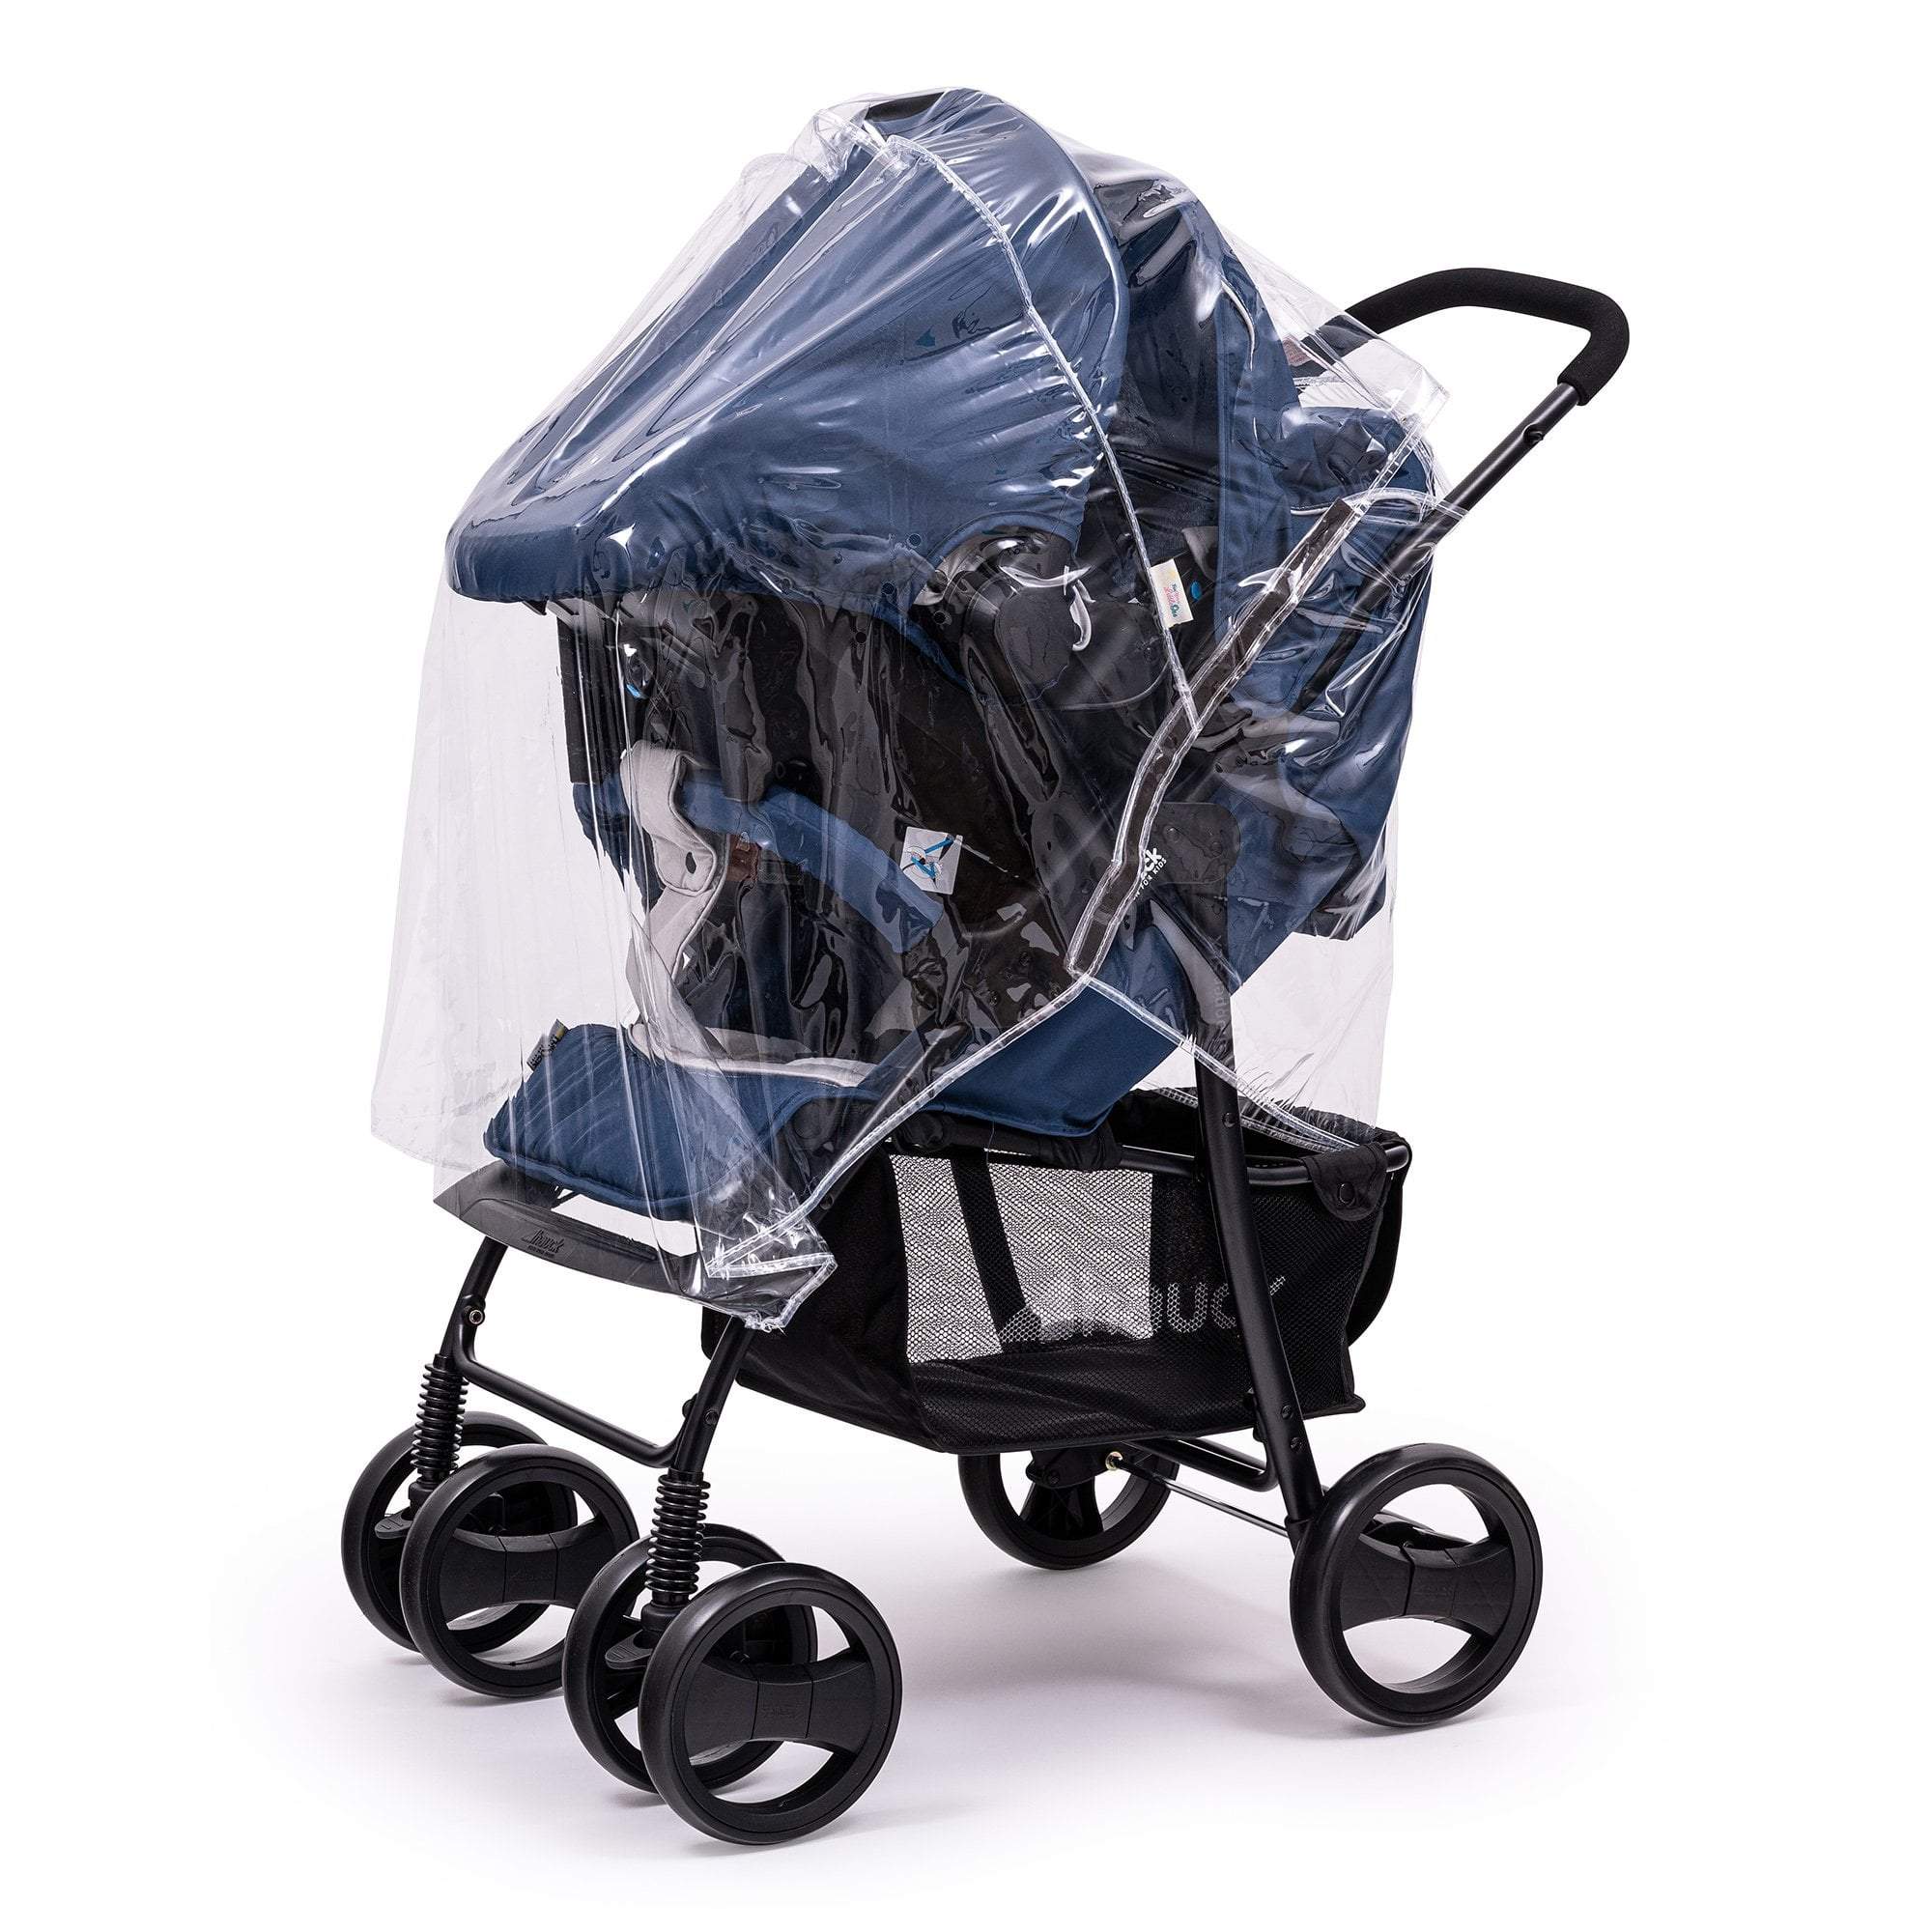 Travel System Raincover Compatible with Kids Kargo - Fits All Models - For Your Little One